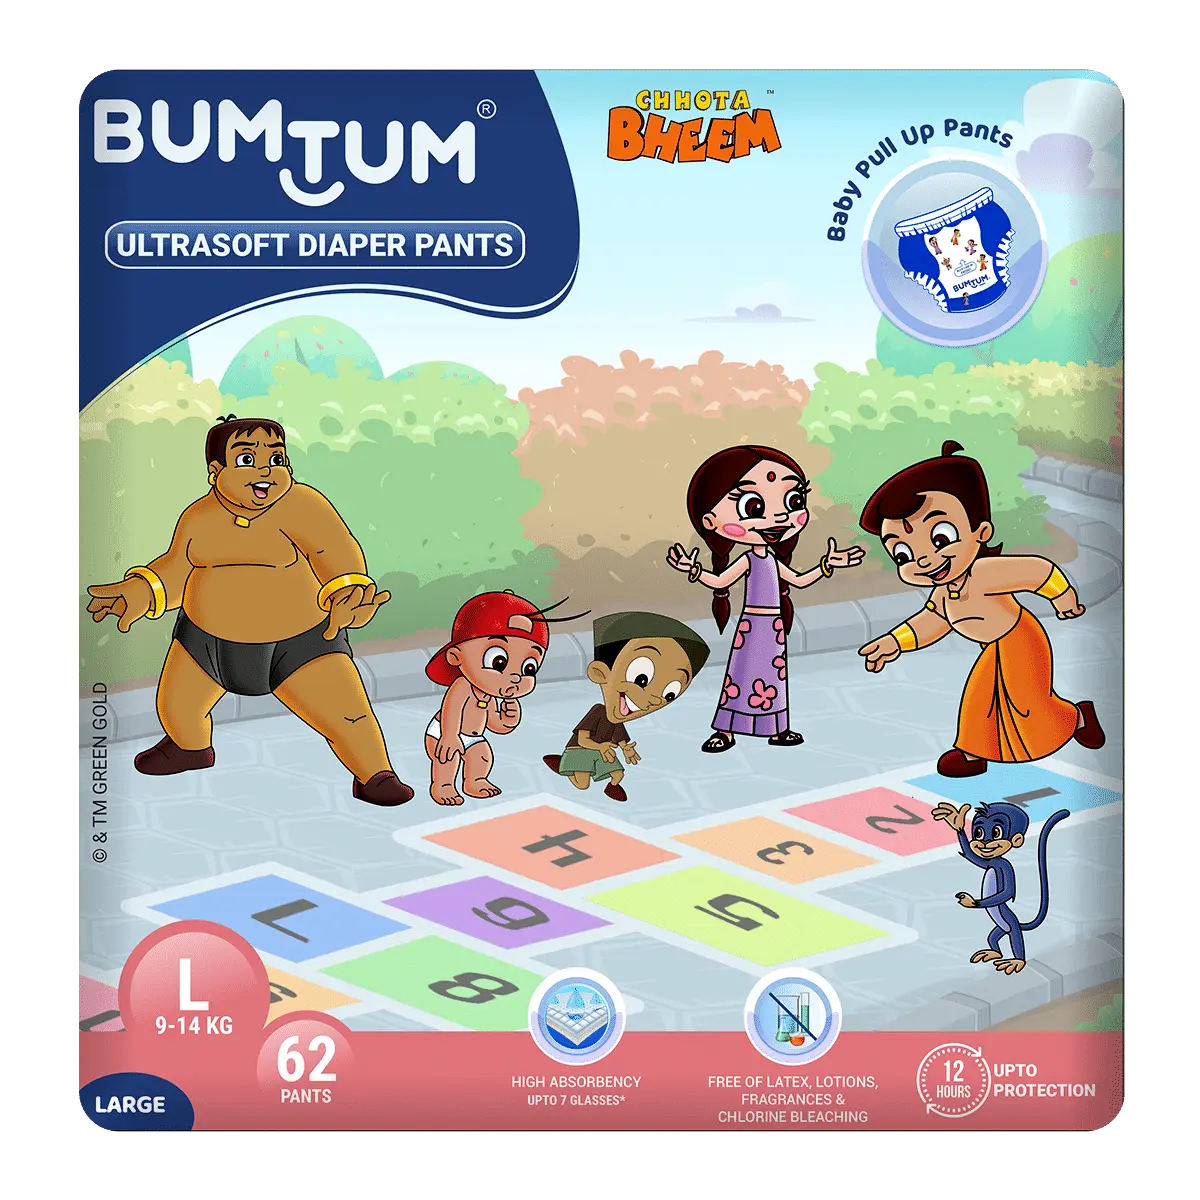 Bumtum Chota Bheem Baby Diaper Pants with Leakage Protection -9 to 14 Kg (Large, 62 Count, Pack of 1)